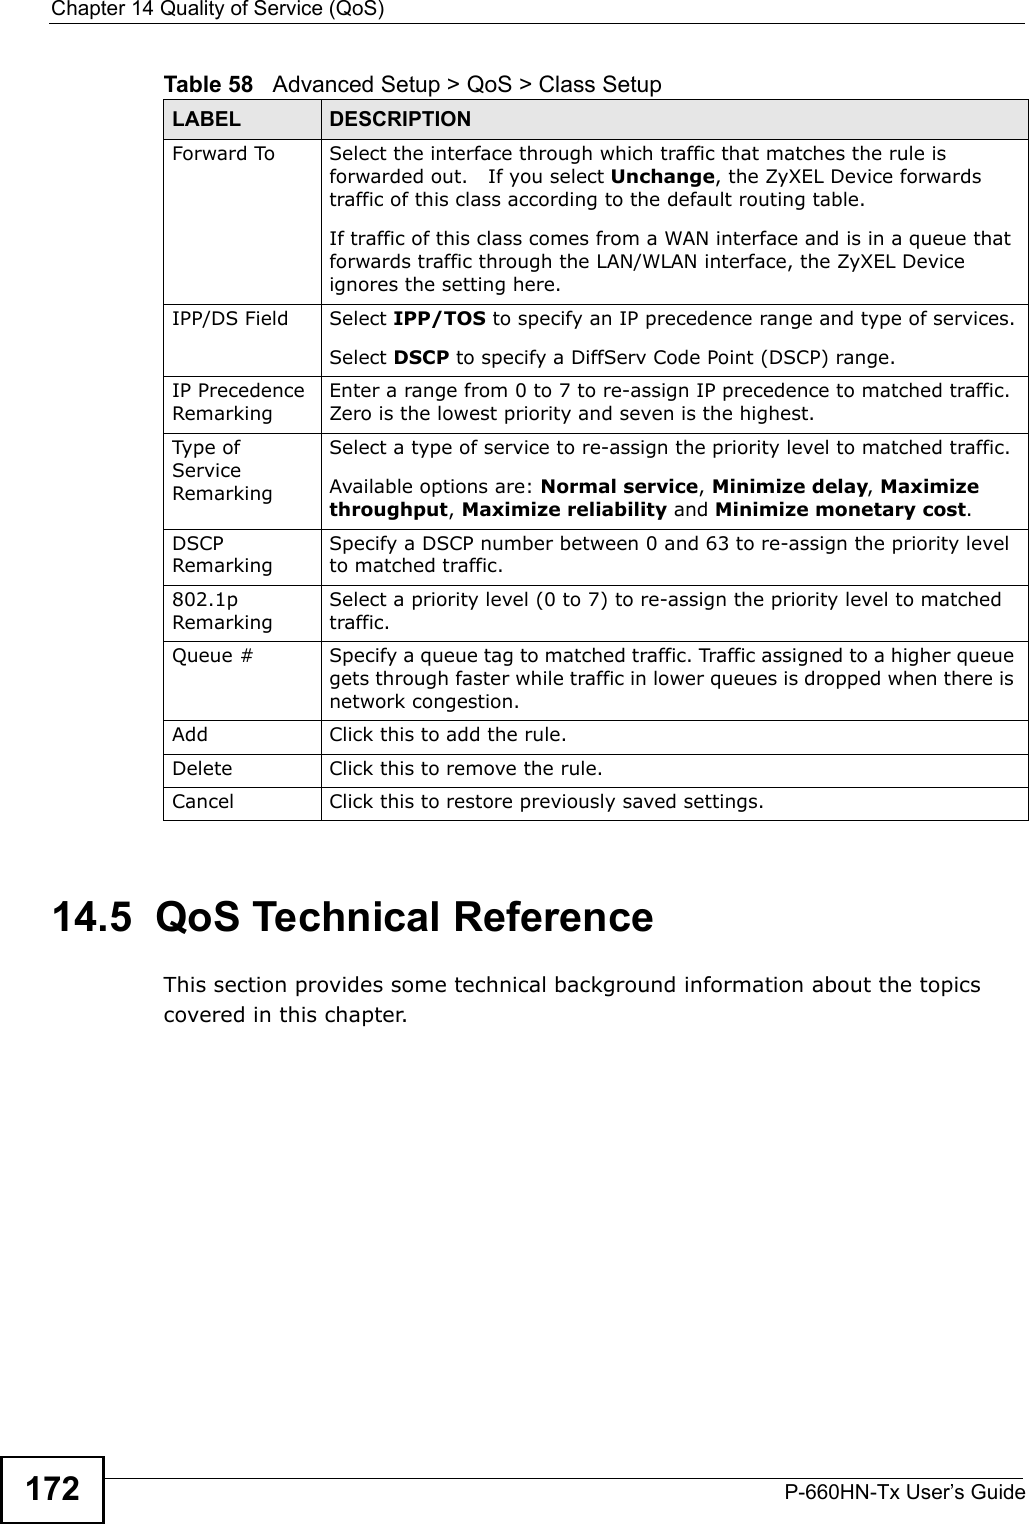 Chapter 14 Quality of Service (QoS)P-660HN-Tx User’s Guide17214.5  QoS Technical ReferenceThis section provides some technical background information about the topics covered in this chapter.Forward To Select the interface through which traffic that matches the rule is forwarded out.   If you select Unchange, the ZyXEL Device forwards traffic of this class according to the default routing table.If traffic of this class comes from a WAN interface and is in a queue that forwards traffic through the LAN/WLAN interface, the ZyXEL Device ignores the setting here.IPP/DS Field Select IPP/TOS to specify an IP precedence range and type of services.Select DSCP to specify a DiffServ Code Point (DSCP) range.IP Precedence RemarkingEnter a range from 0 to 7 to re-assign IP precedence to matched traffic. Zero is the lowest priority and seven is the highest.Type of Service RemarkingSelect a type of service to re-assign the priority level to matched traffic.Available options are: Normal service, Minimize delay, Maximize throughput, Maximize reliability and Minimize monetary cost.DSCP RemarkingSpecify a DSCP number between 0 and 63 to re-assign the priority level to matched traffic.802.1p RemarkingSelect a priority level (0 to 7) to re-assign the priority level to matched traffic.Queue # Specify a queue tag to matched traffic. Traffic assigned to a higher queue gets through faster while traffic in lower queues is dropped when there is network congestion.Add Click this to add the rule.Delete Click this to remove the rule.Cancel Click this to restore previously saved settings.Table 58   Advanced Setup &gt; QoS &gt; Class SetupLABEL DESCRIPTION